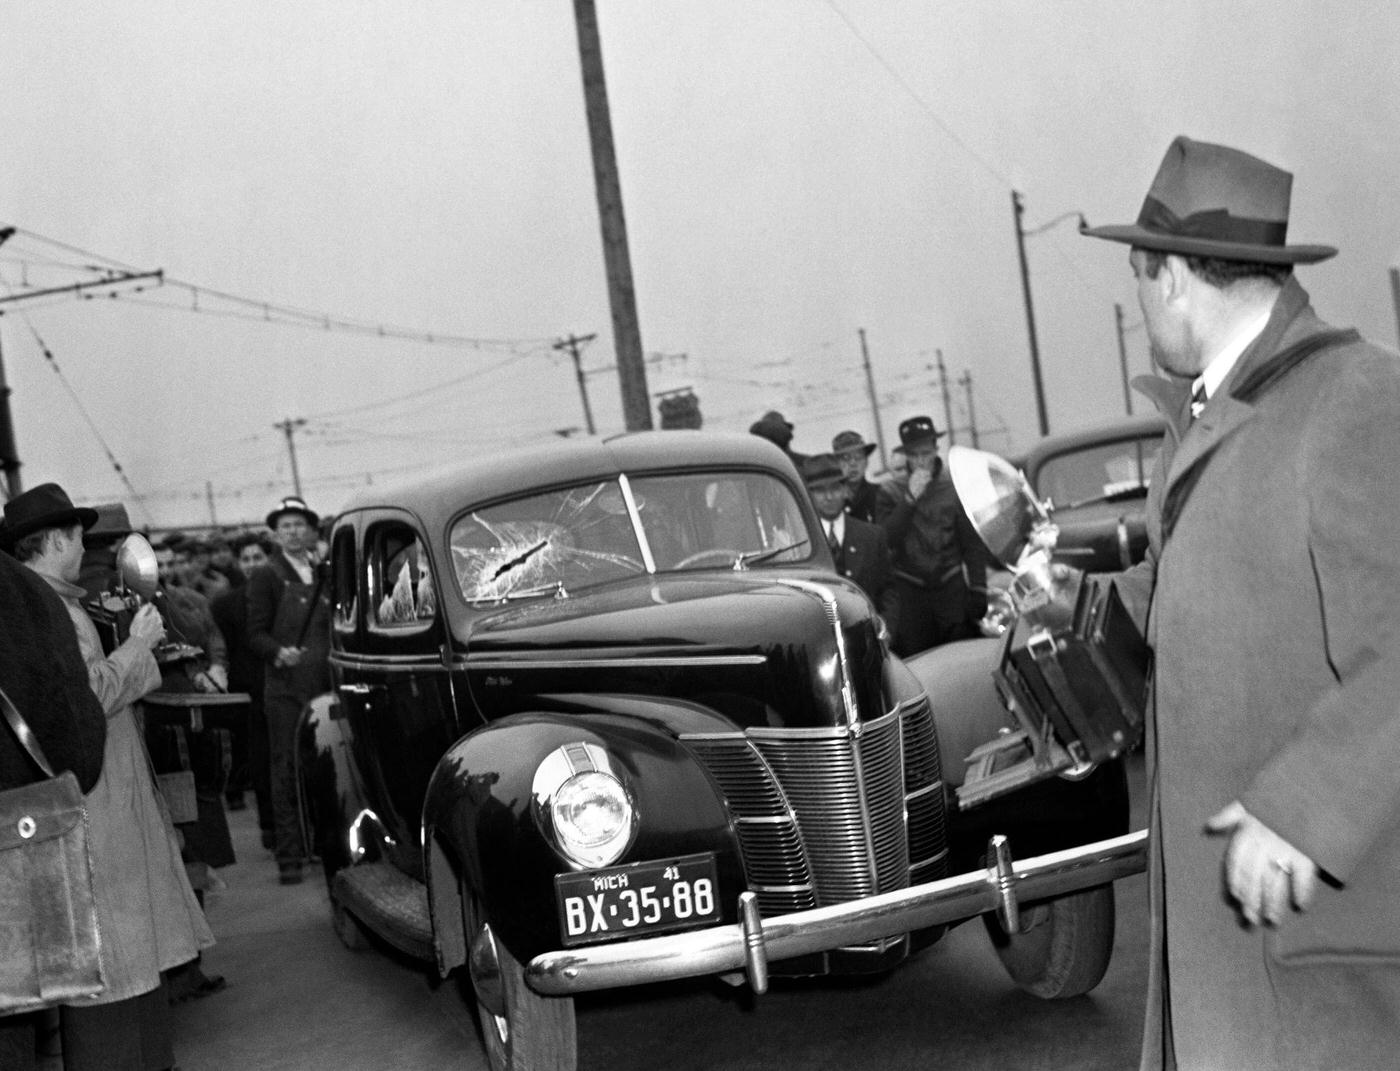 A non striker was taken into custody by state police here, after he and a companion swung at picketers who stopped their car and broke windows in Dearborn, Michigan, April 11, 1941.